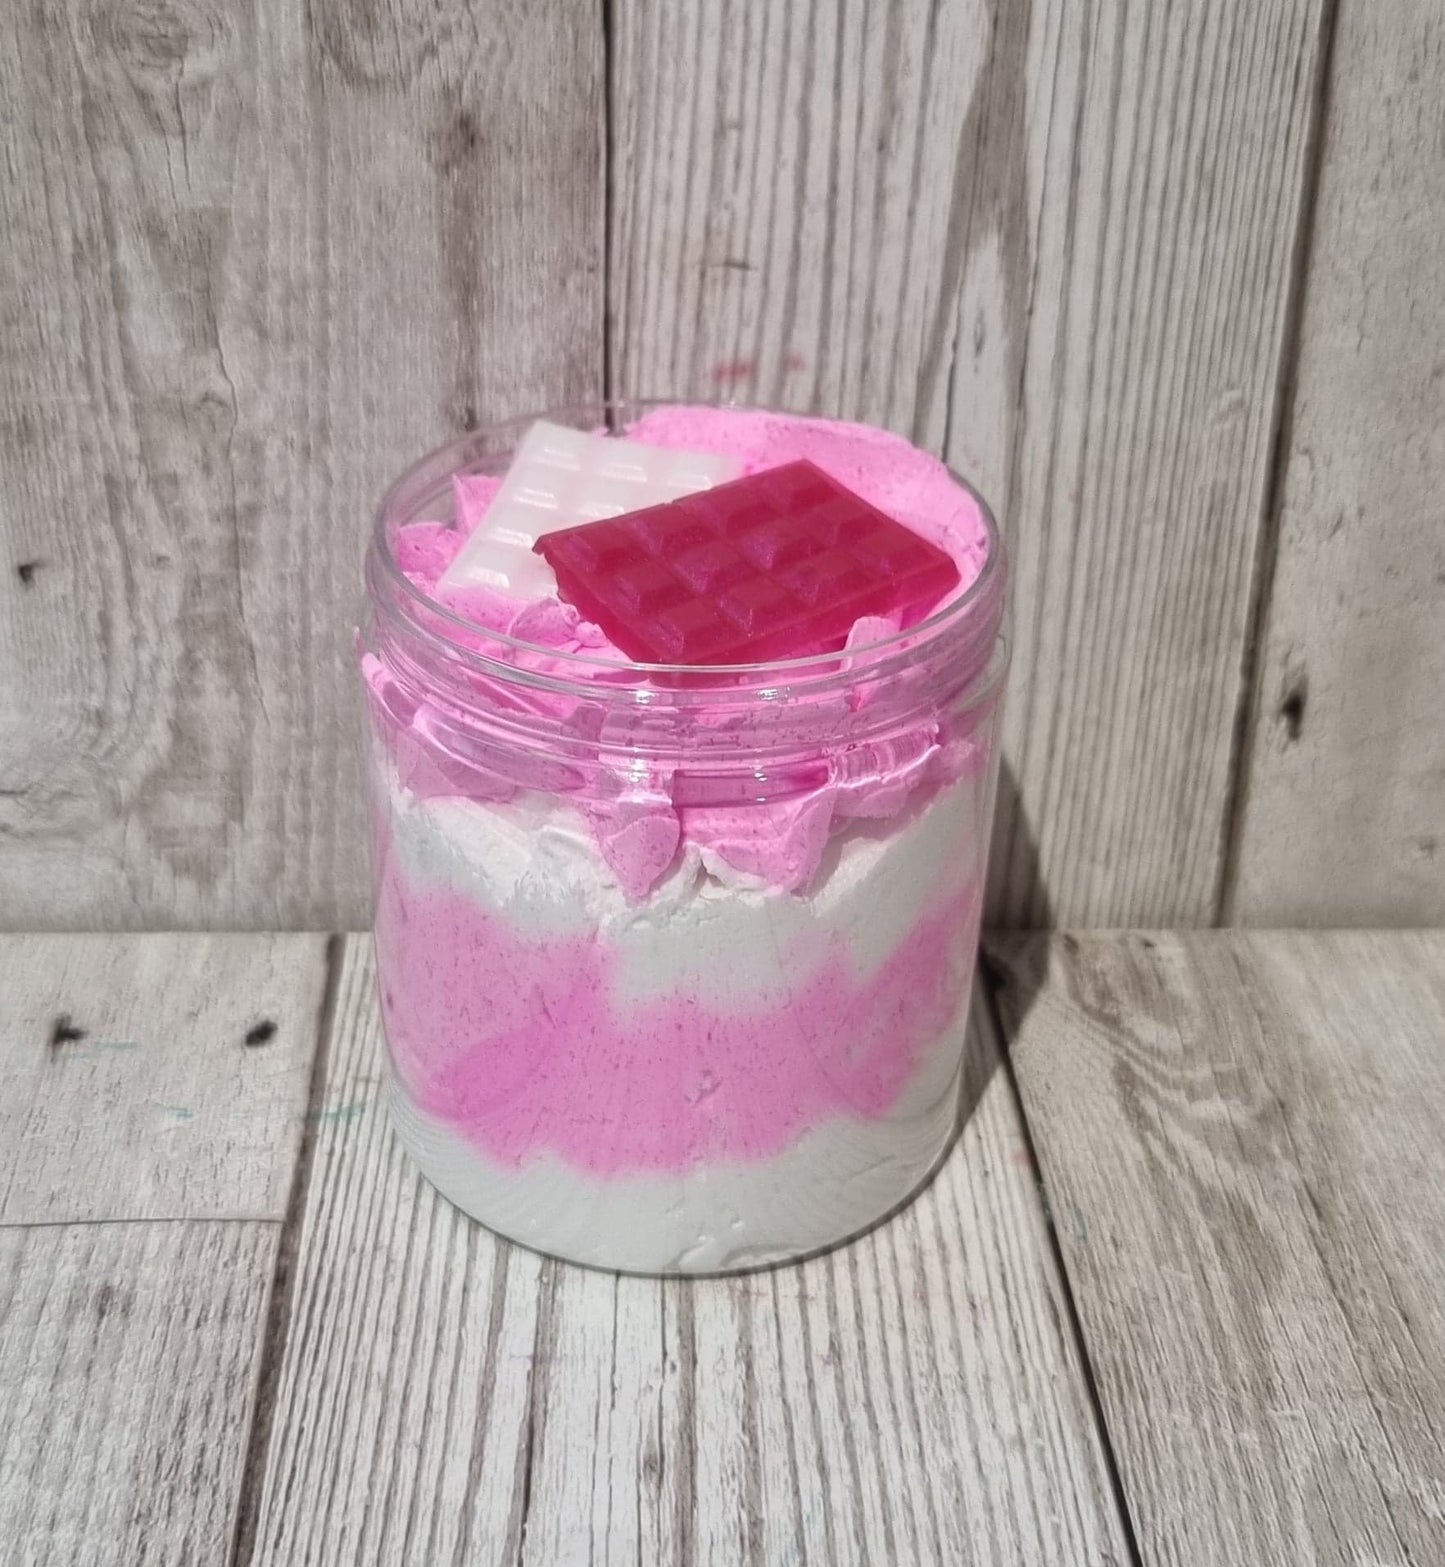 'White Chocolate and Raspberry' Soap Fluff